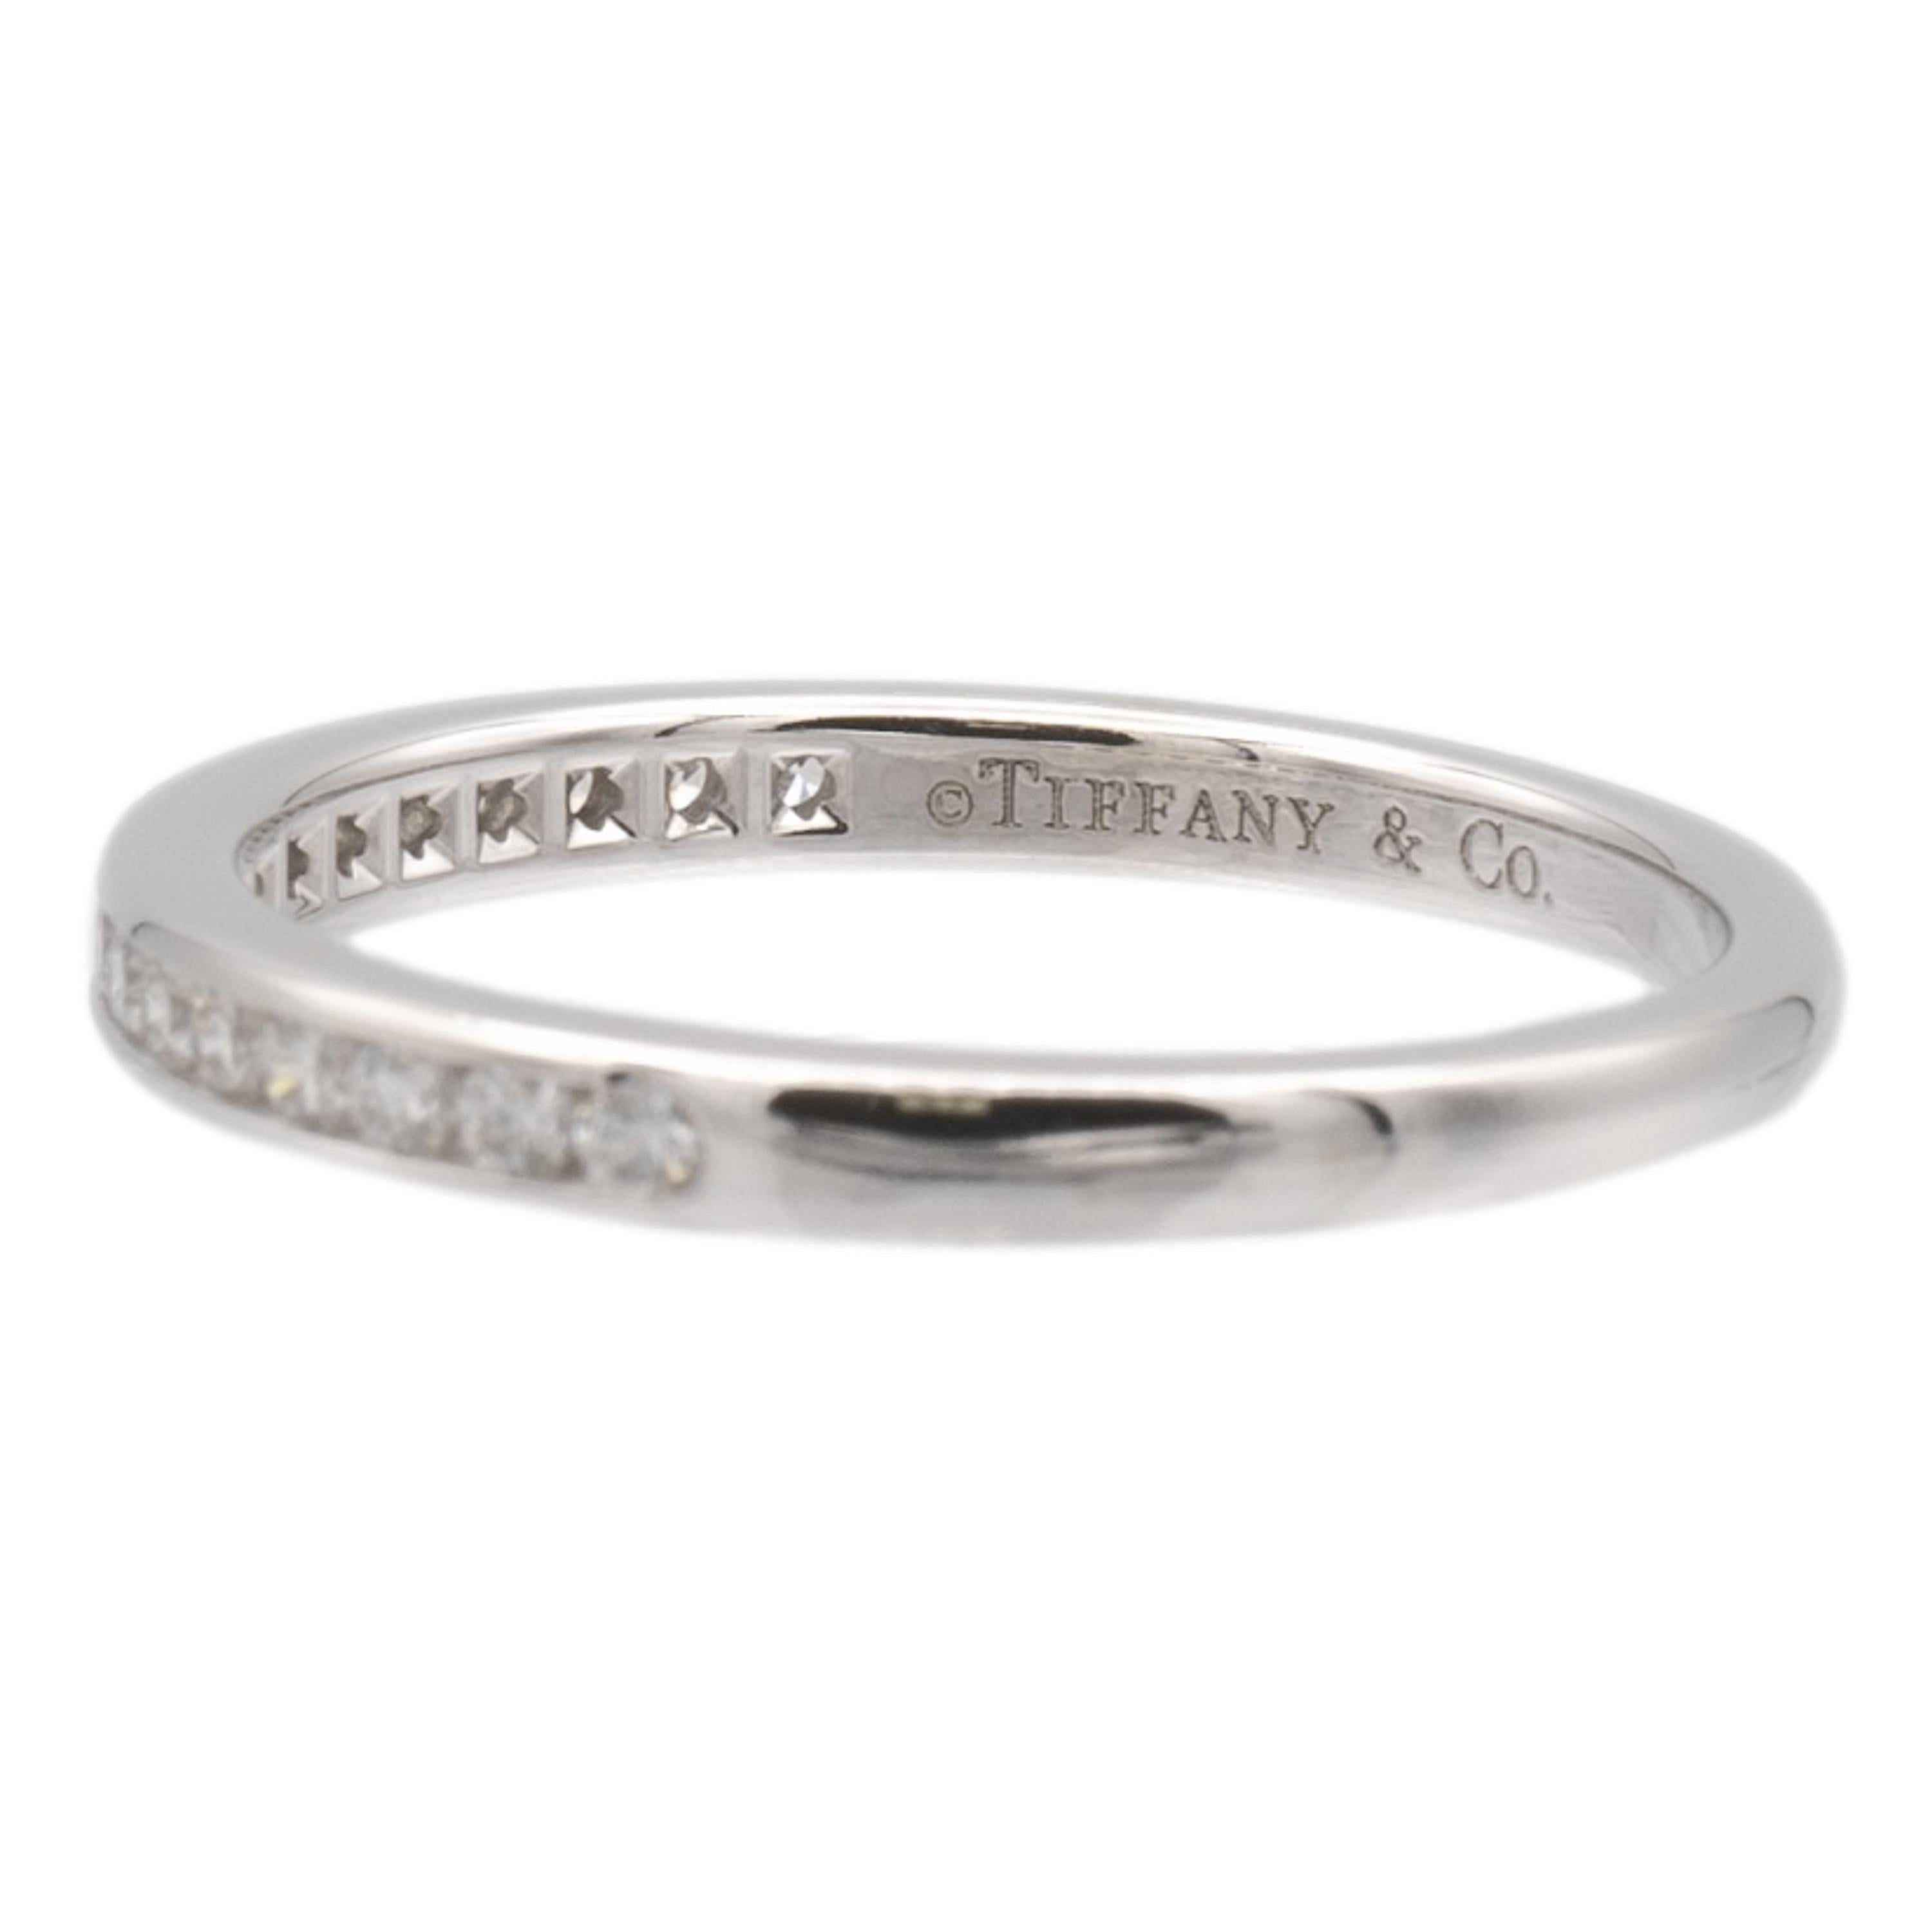 Taille brillant Tiffany & Co Platinum Half Circle Eternity Band Ring .17ct 2 mm Size 6.5 en vente